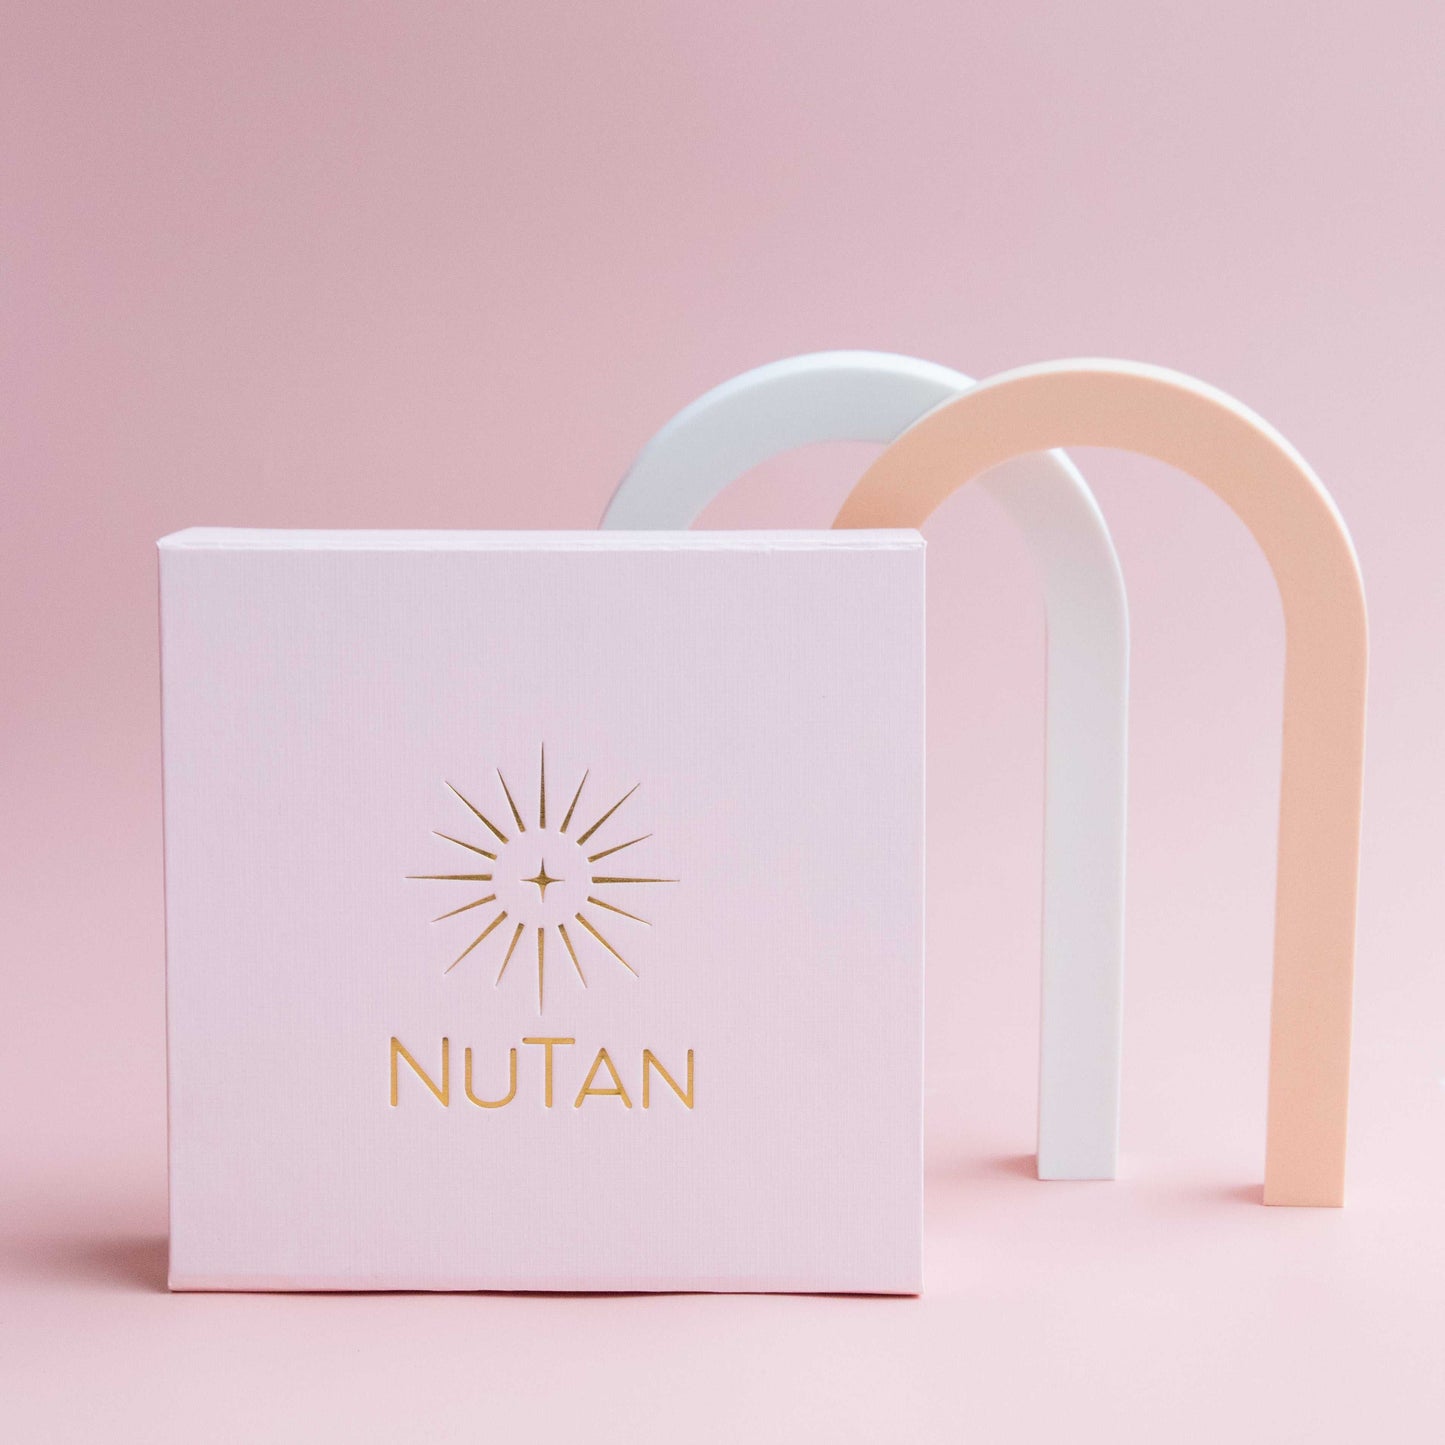 NuTan® kit - 10 tanning patches